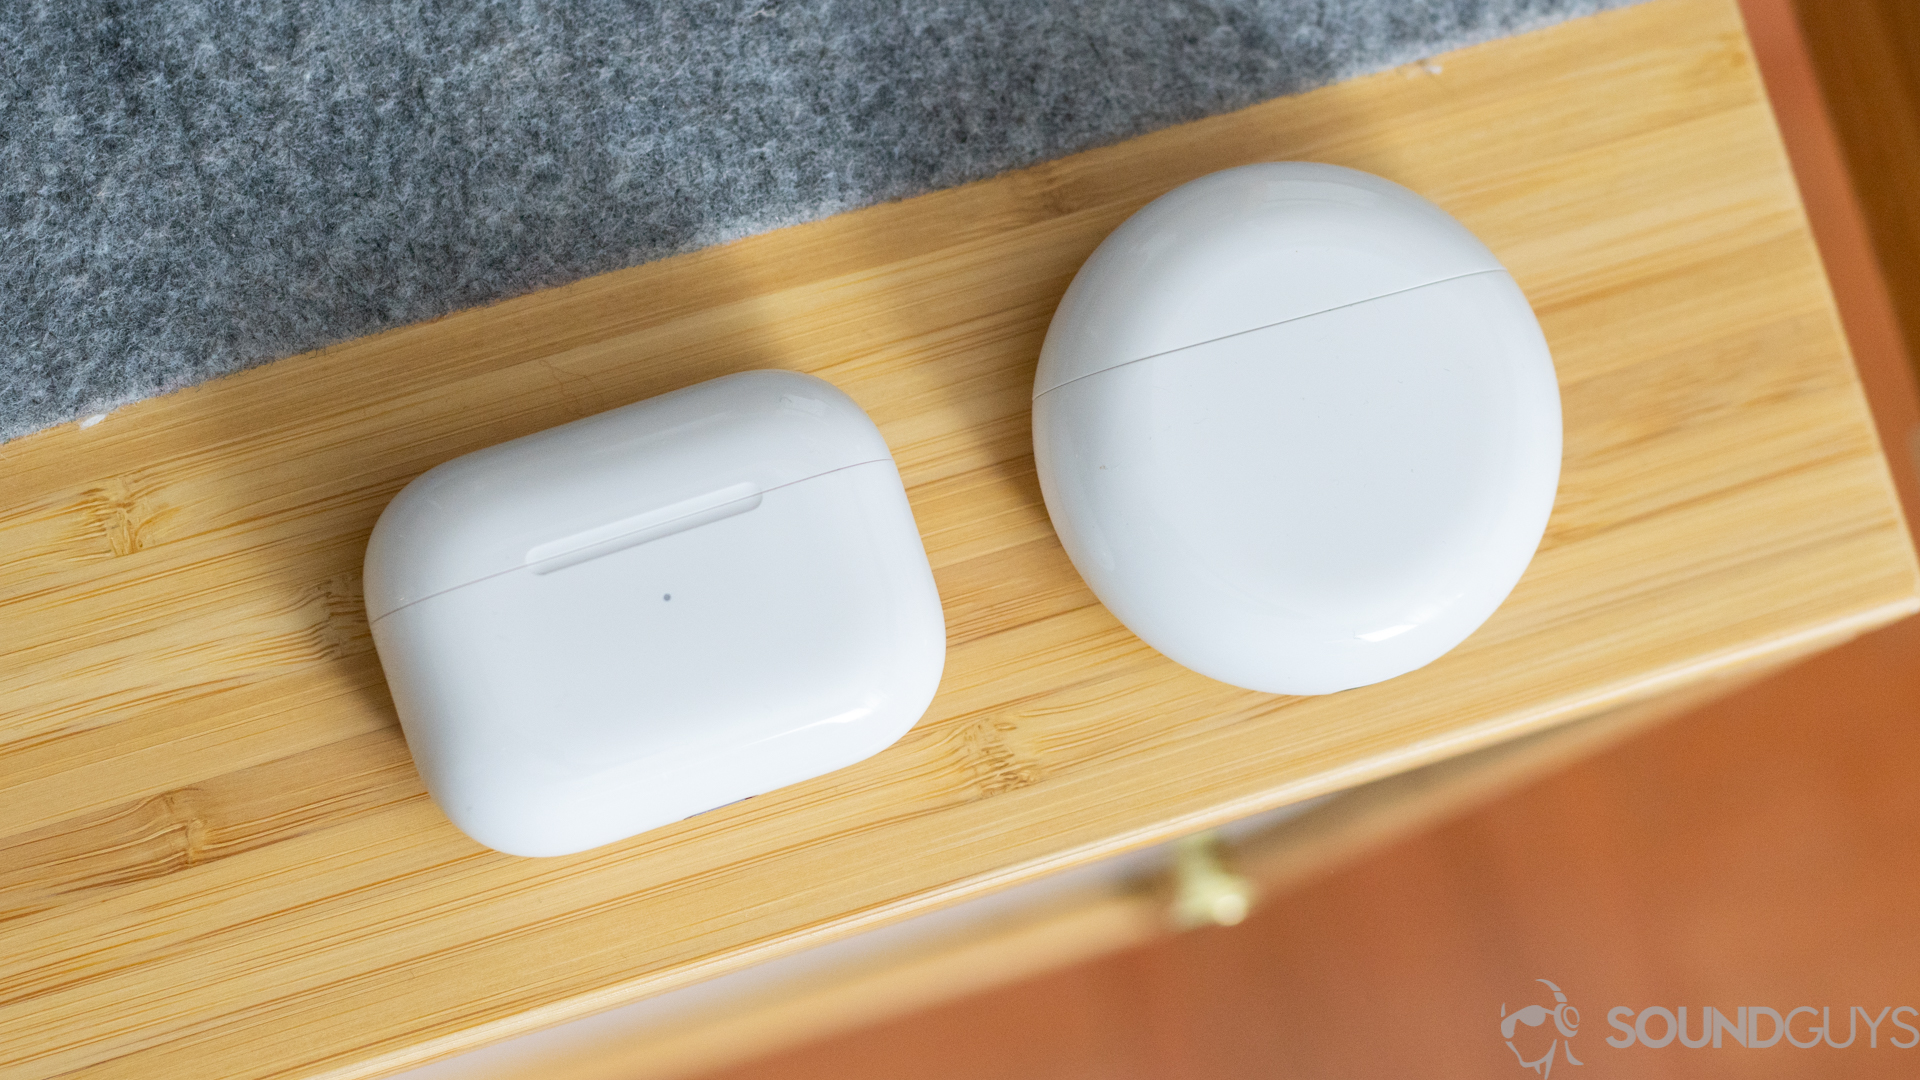 Both white charging cases pictured from above on a wood desk